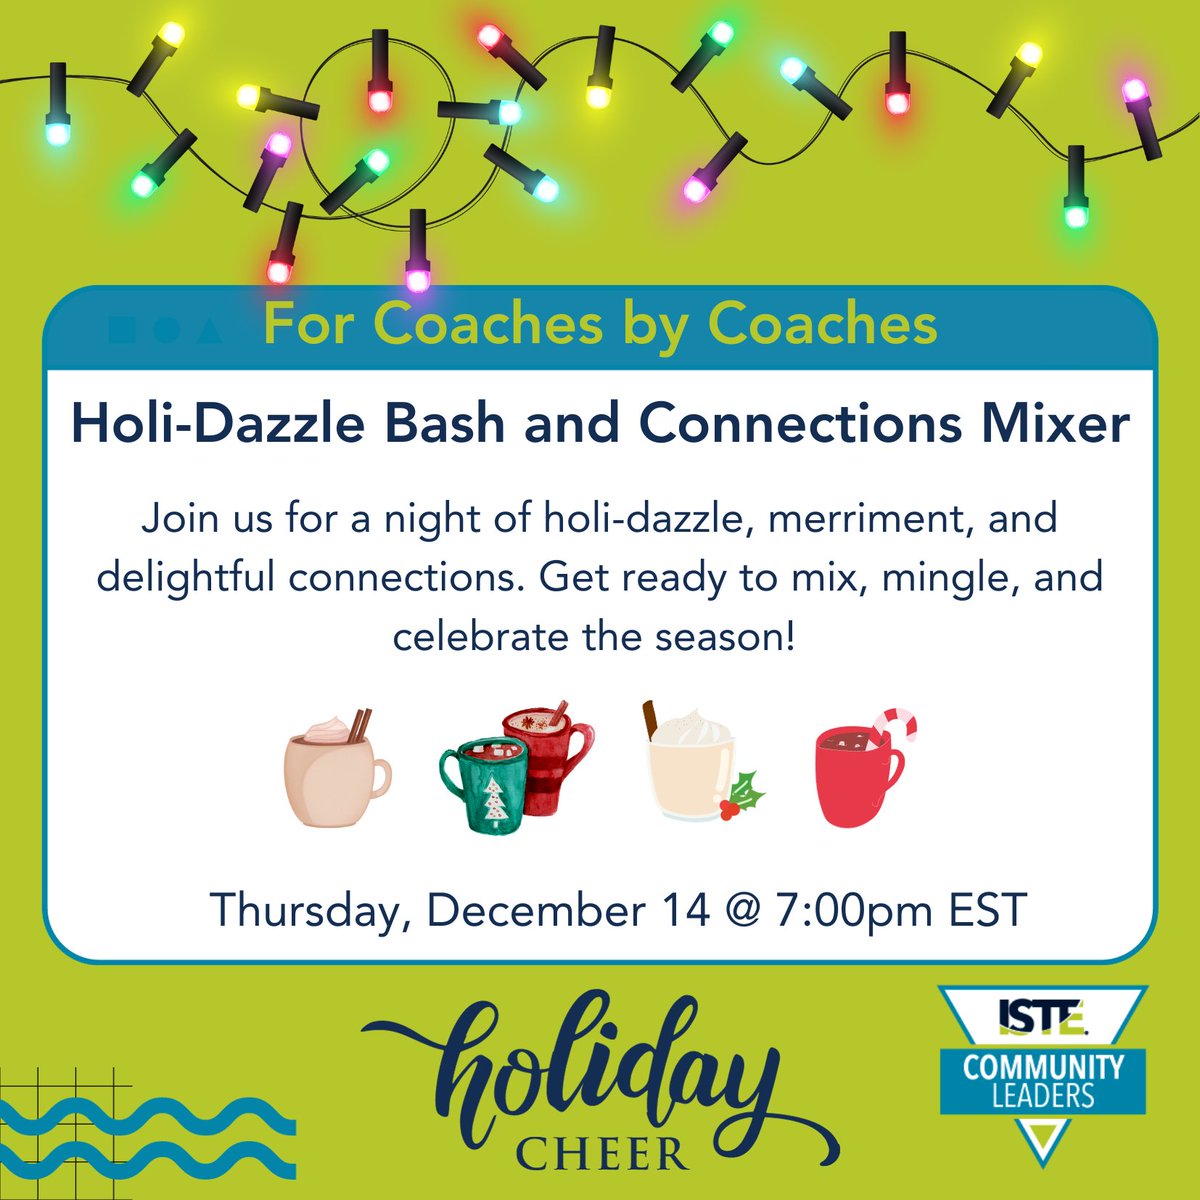 Join the #ForCoachesByCoaches @ISTECommunity Leaders on Thursday 12/14 at 7pm EST for an hour of holi-dazzle, merriment, and delightful connections. Get ready to mix, mingle, and celebrate the season! Register bit.ly/ISTEHoli-Dazzl…